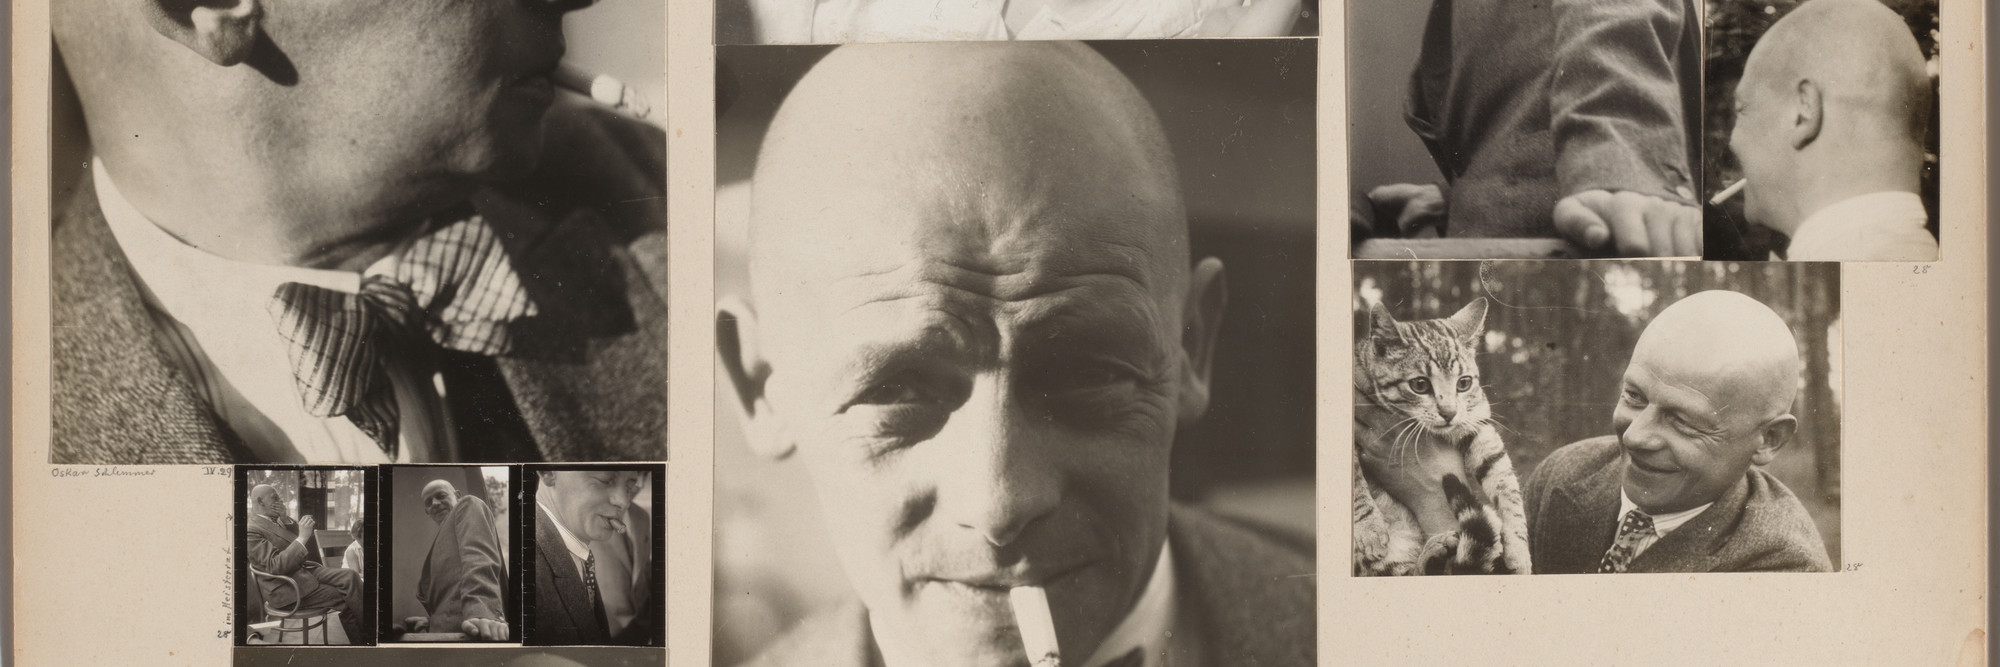 One and One Is Four: The Bauhaus Photocollages of Josef Albers | MoMA